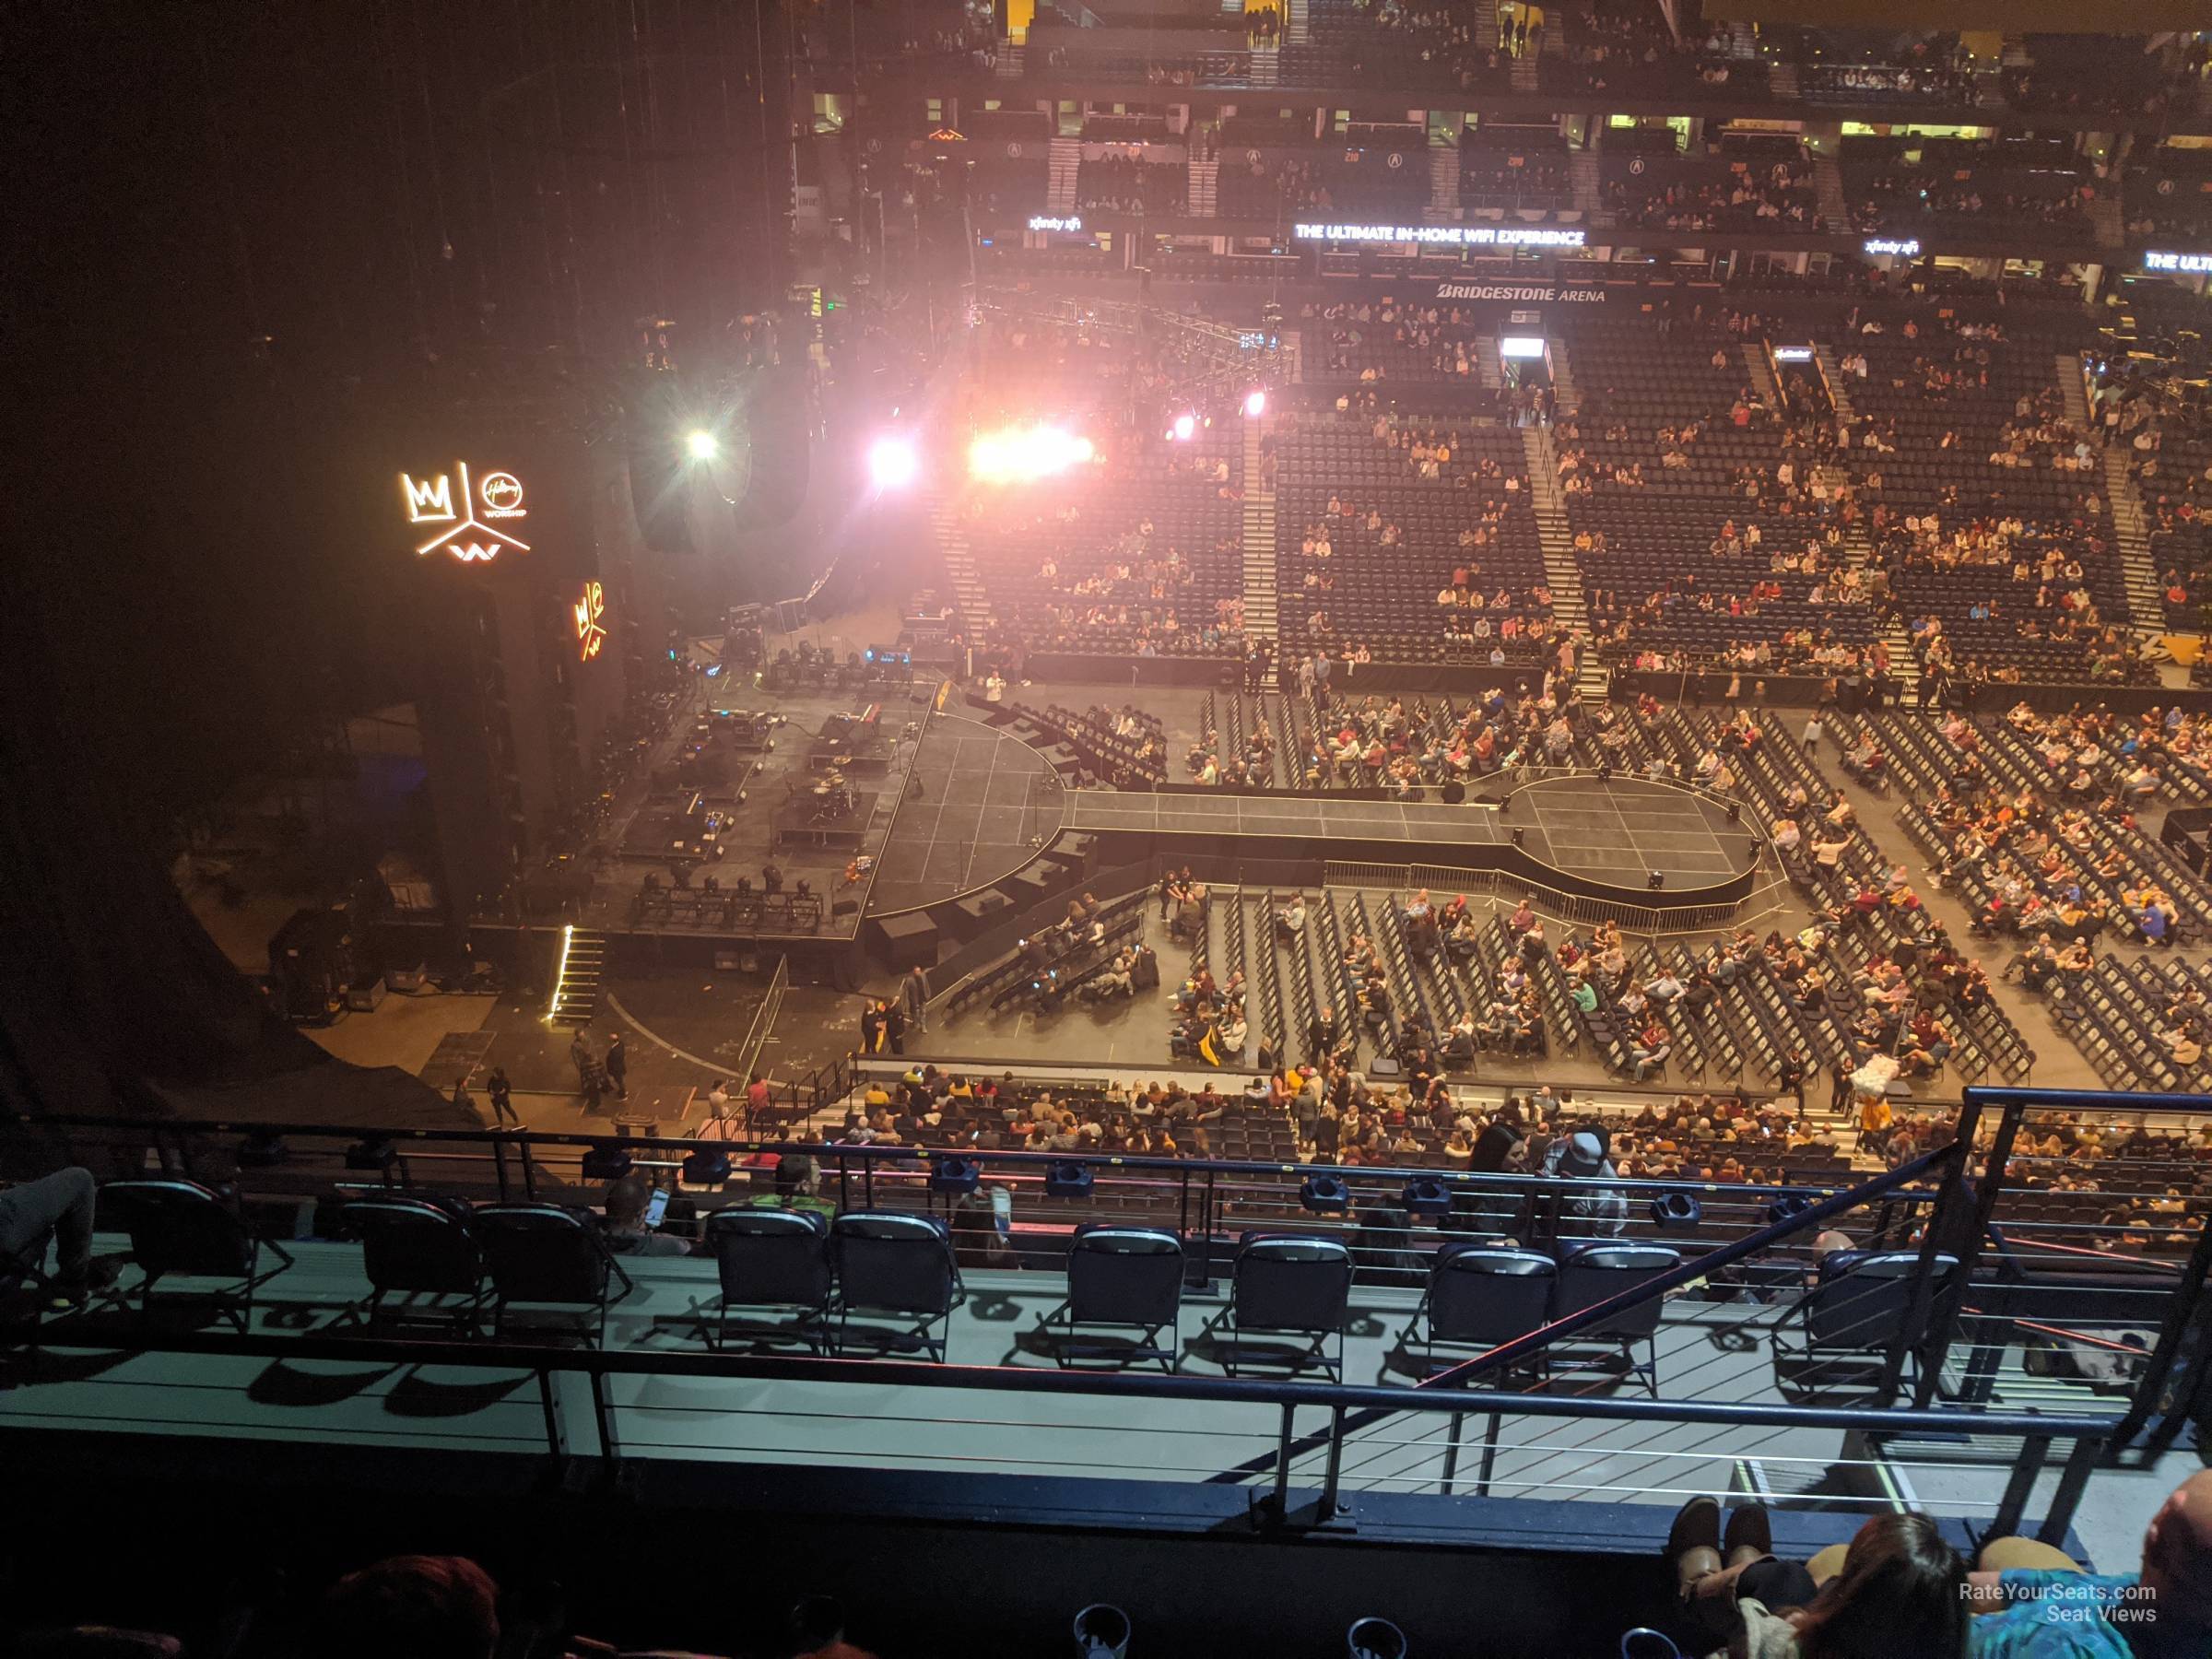 Section 324 at Bridgestone Arena for Concerts